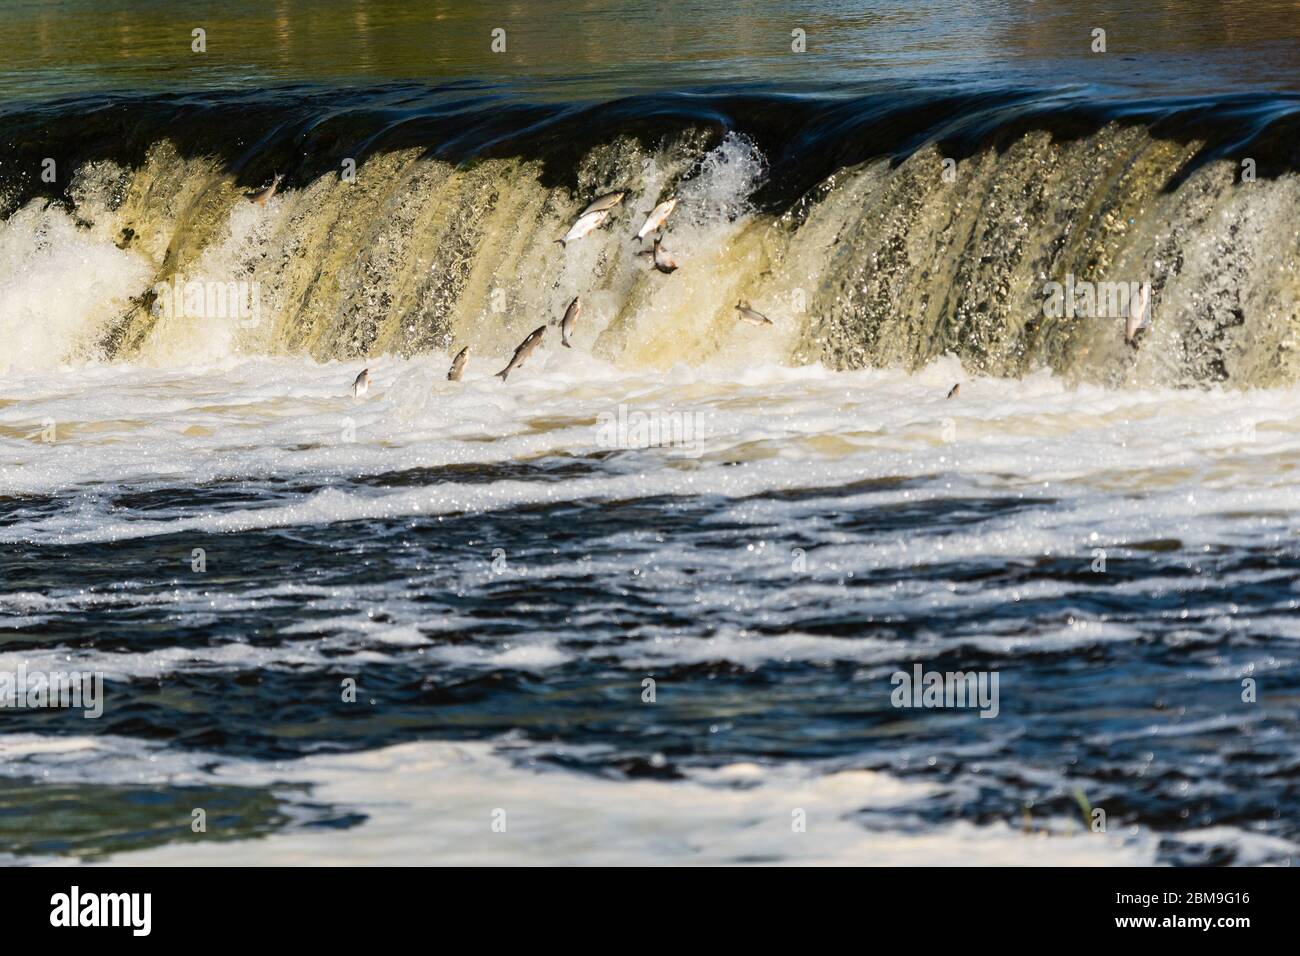 in the spring, fish fly or jump in the widest waterfall in Europe and the fish species is called vimba, which is a fish of the sapalu family that goes Stock Photo